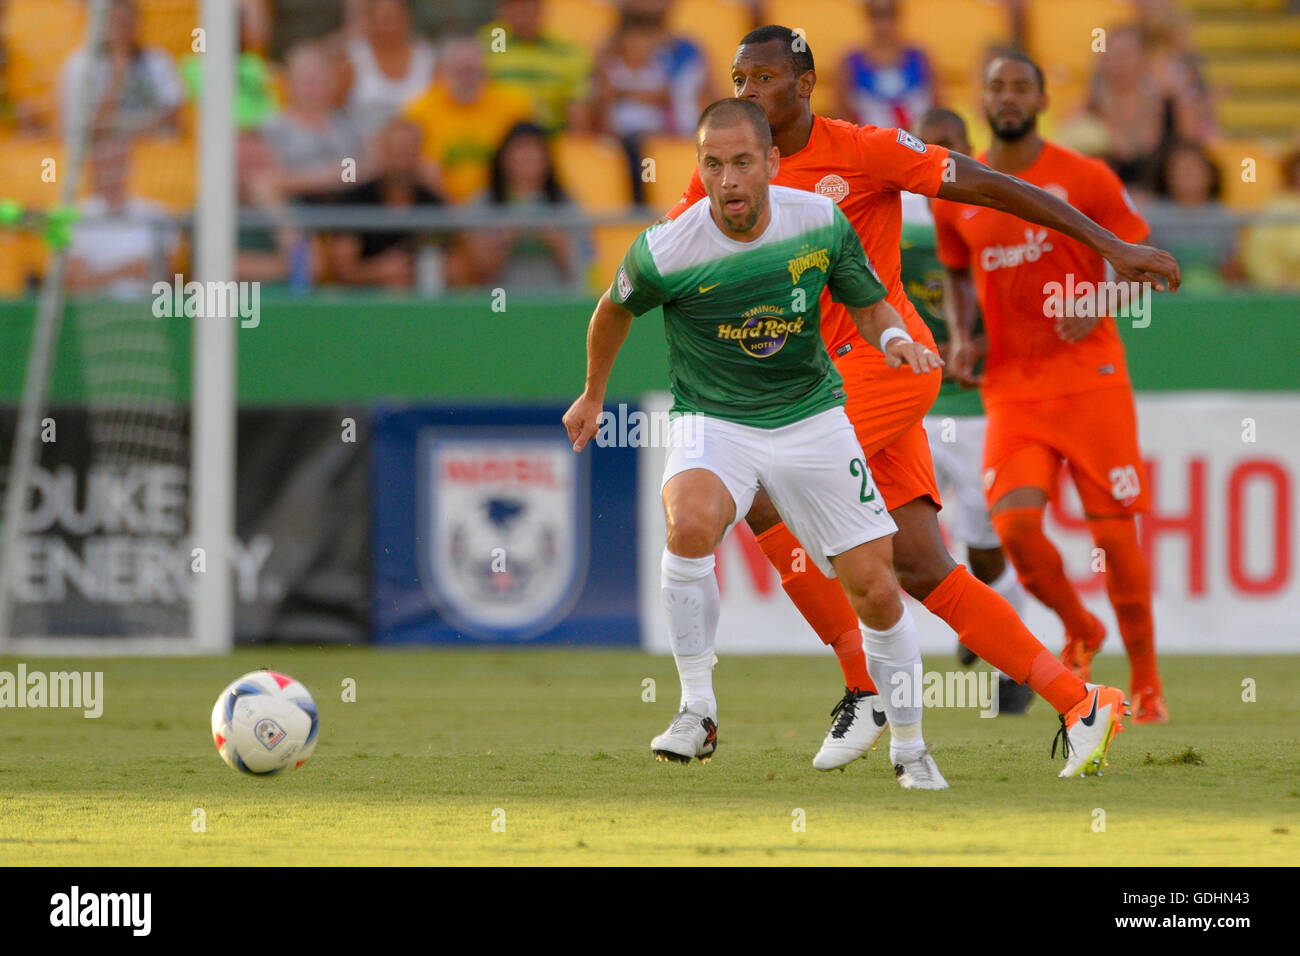 Former EPL player Joe Cole and the Tampa Bay Rowdies play the Rhinos